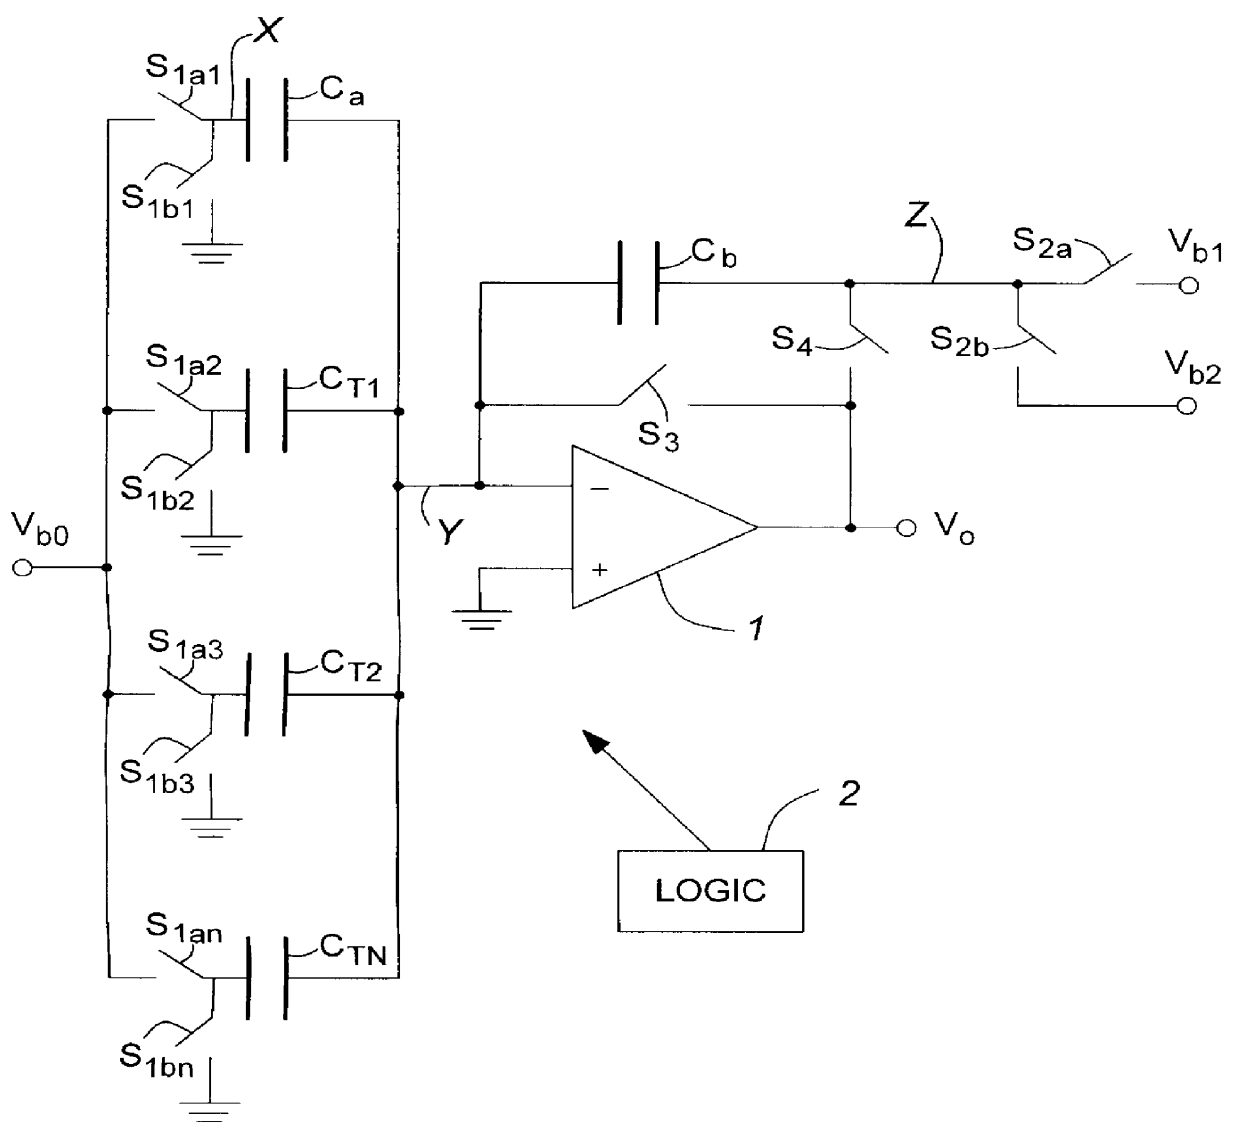 Generalized procedure for the calibration of switched capacitor gain stages